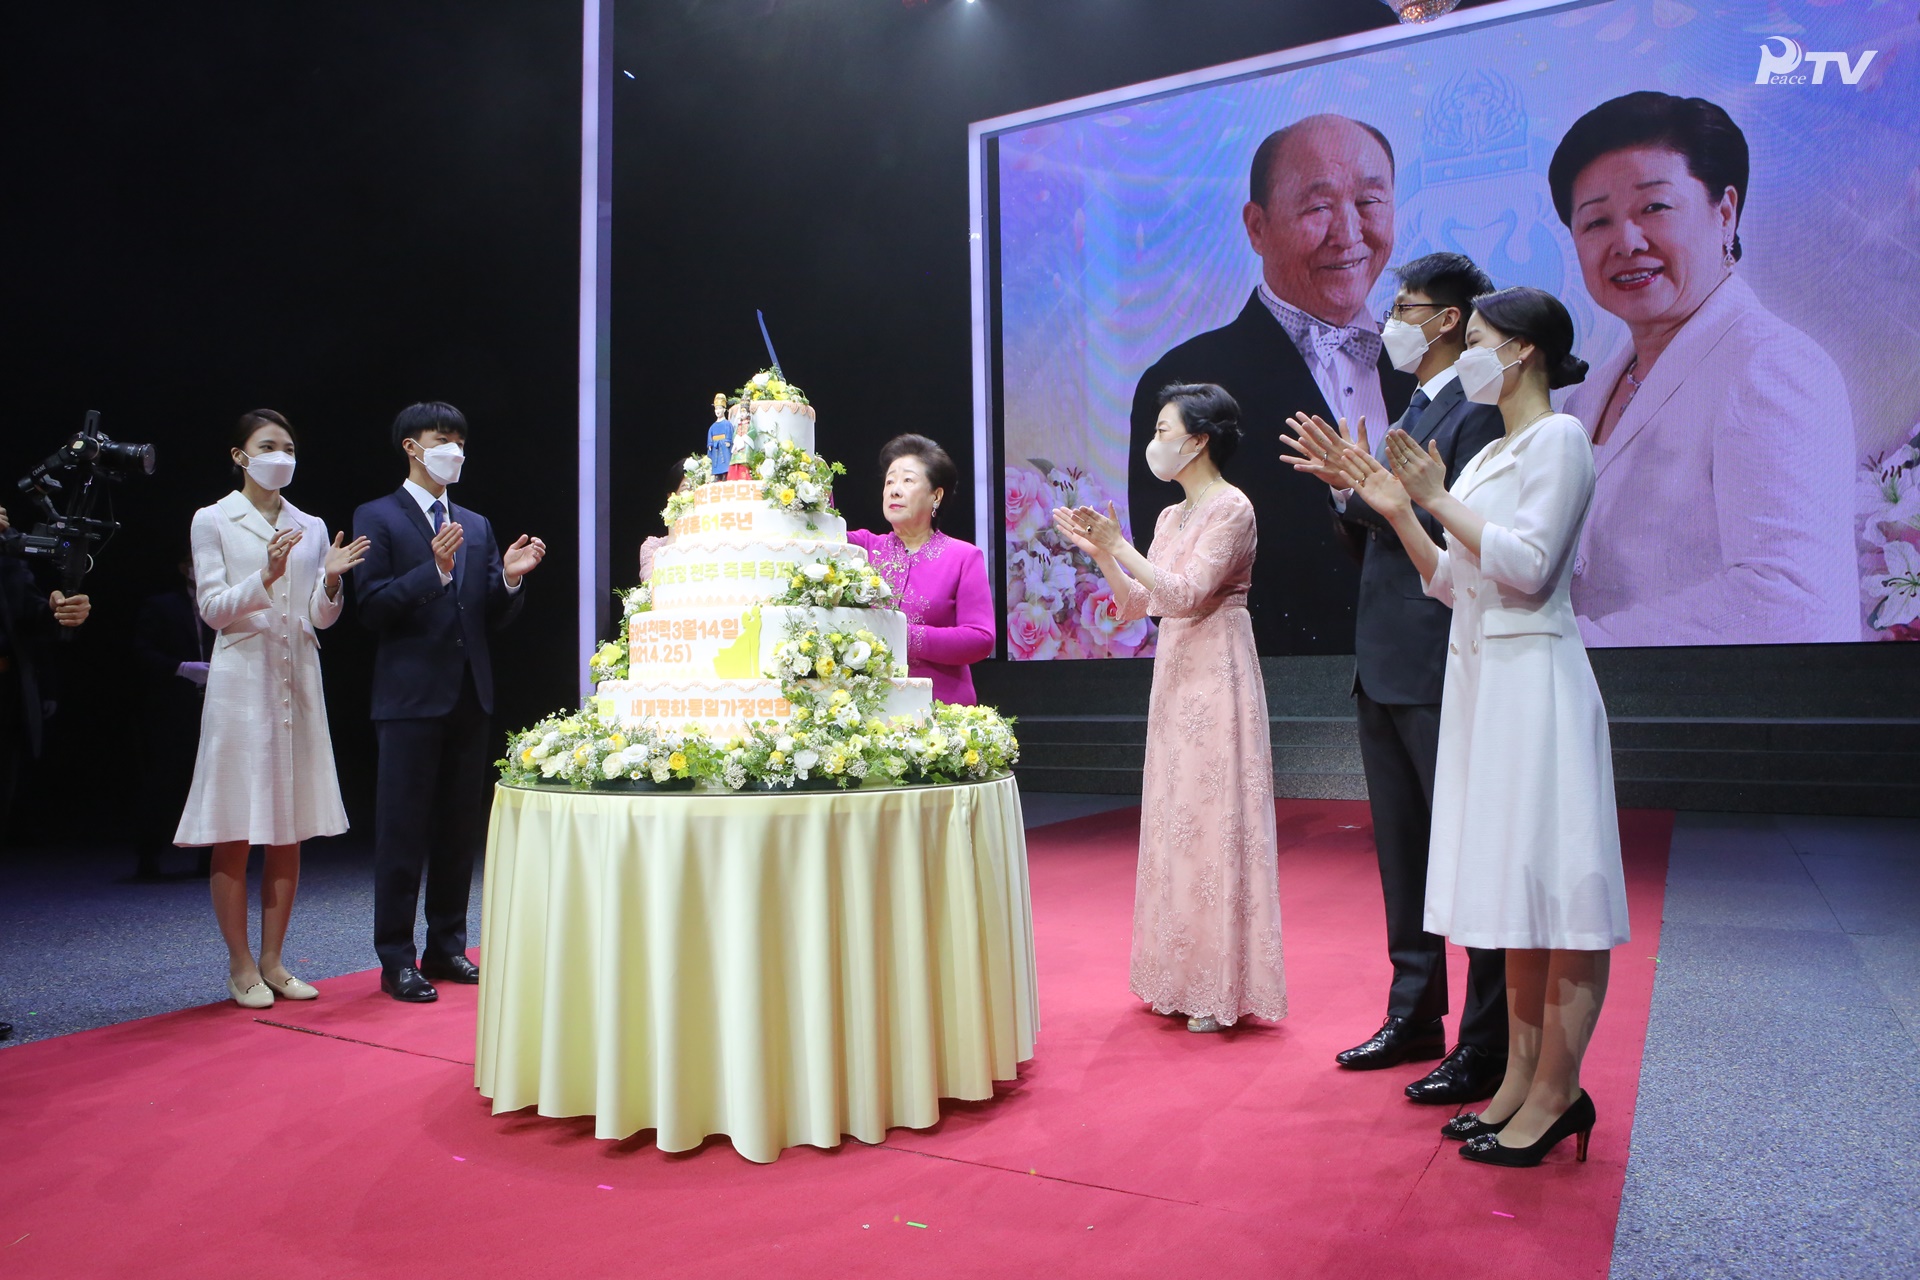 Hyojeong Cosmic Blessing Festival Celebrating the 61st Anniversary of True Parents’ Holy Wedding (25, April)